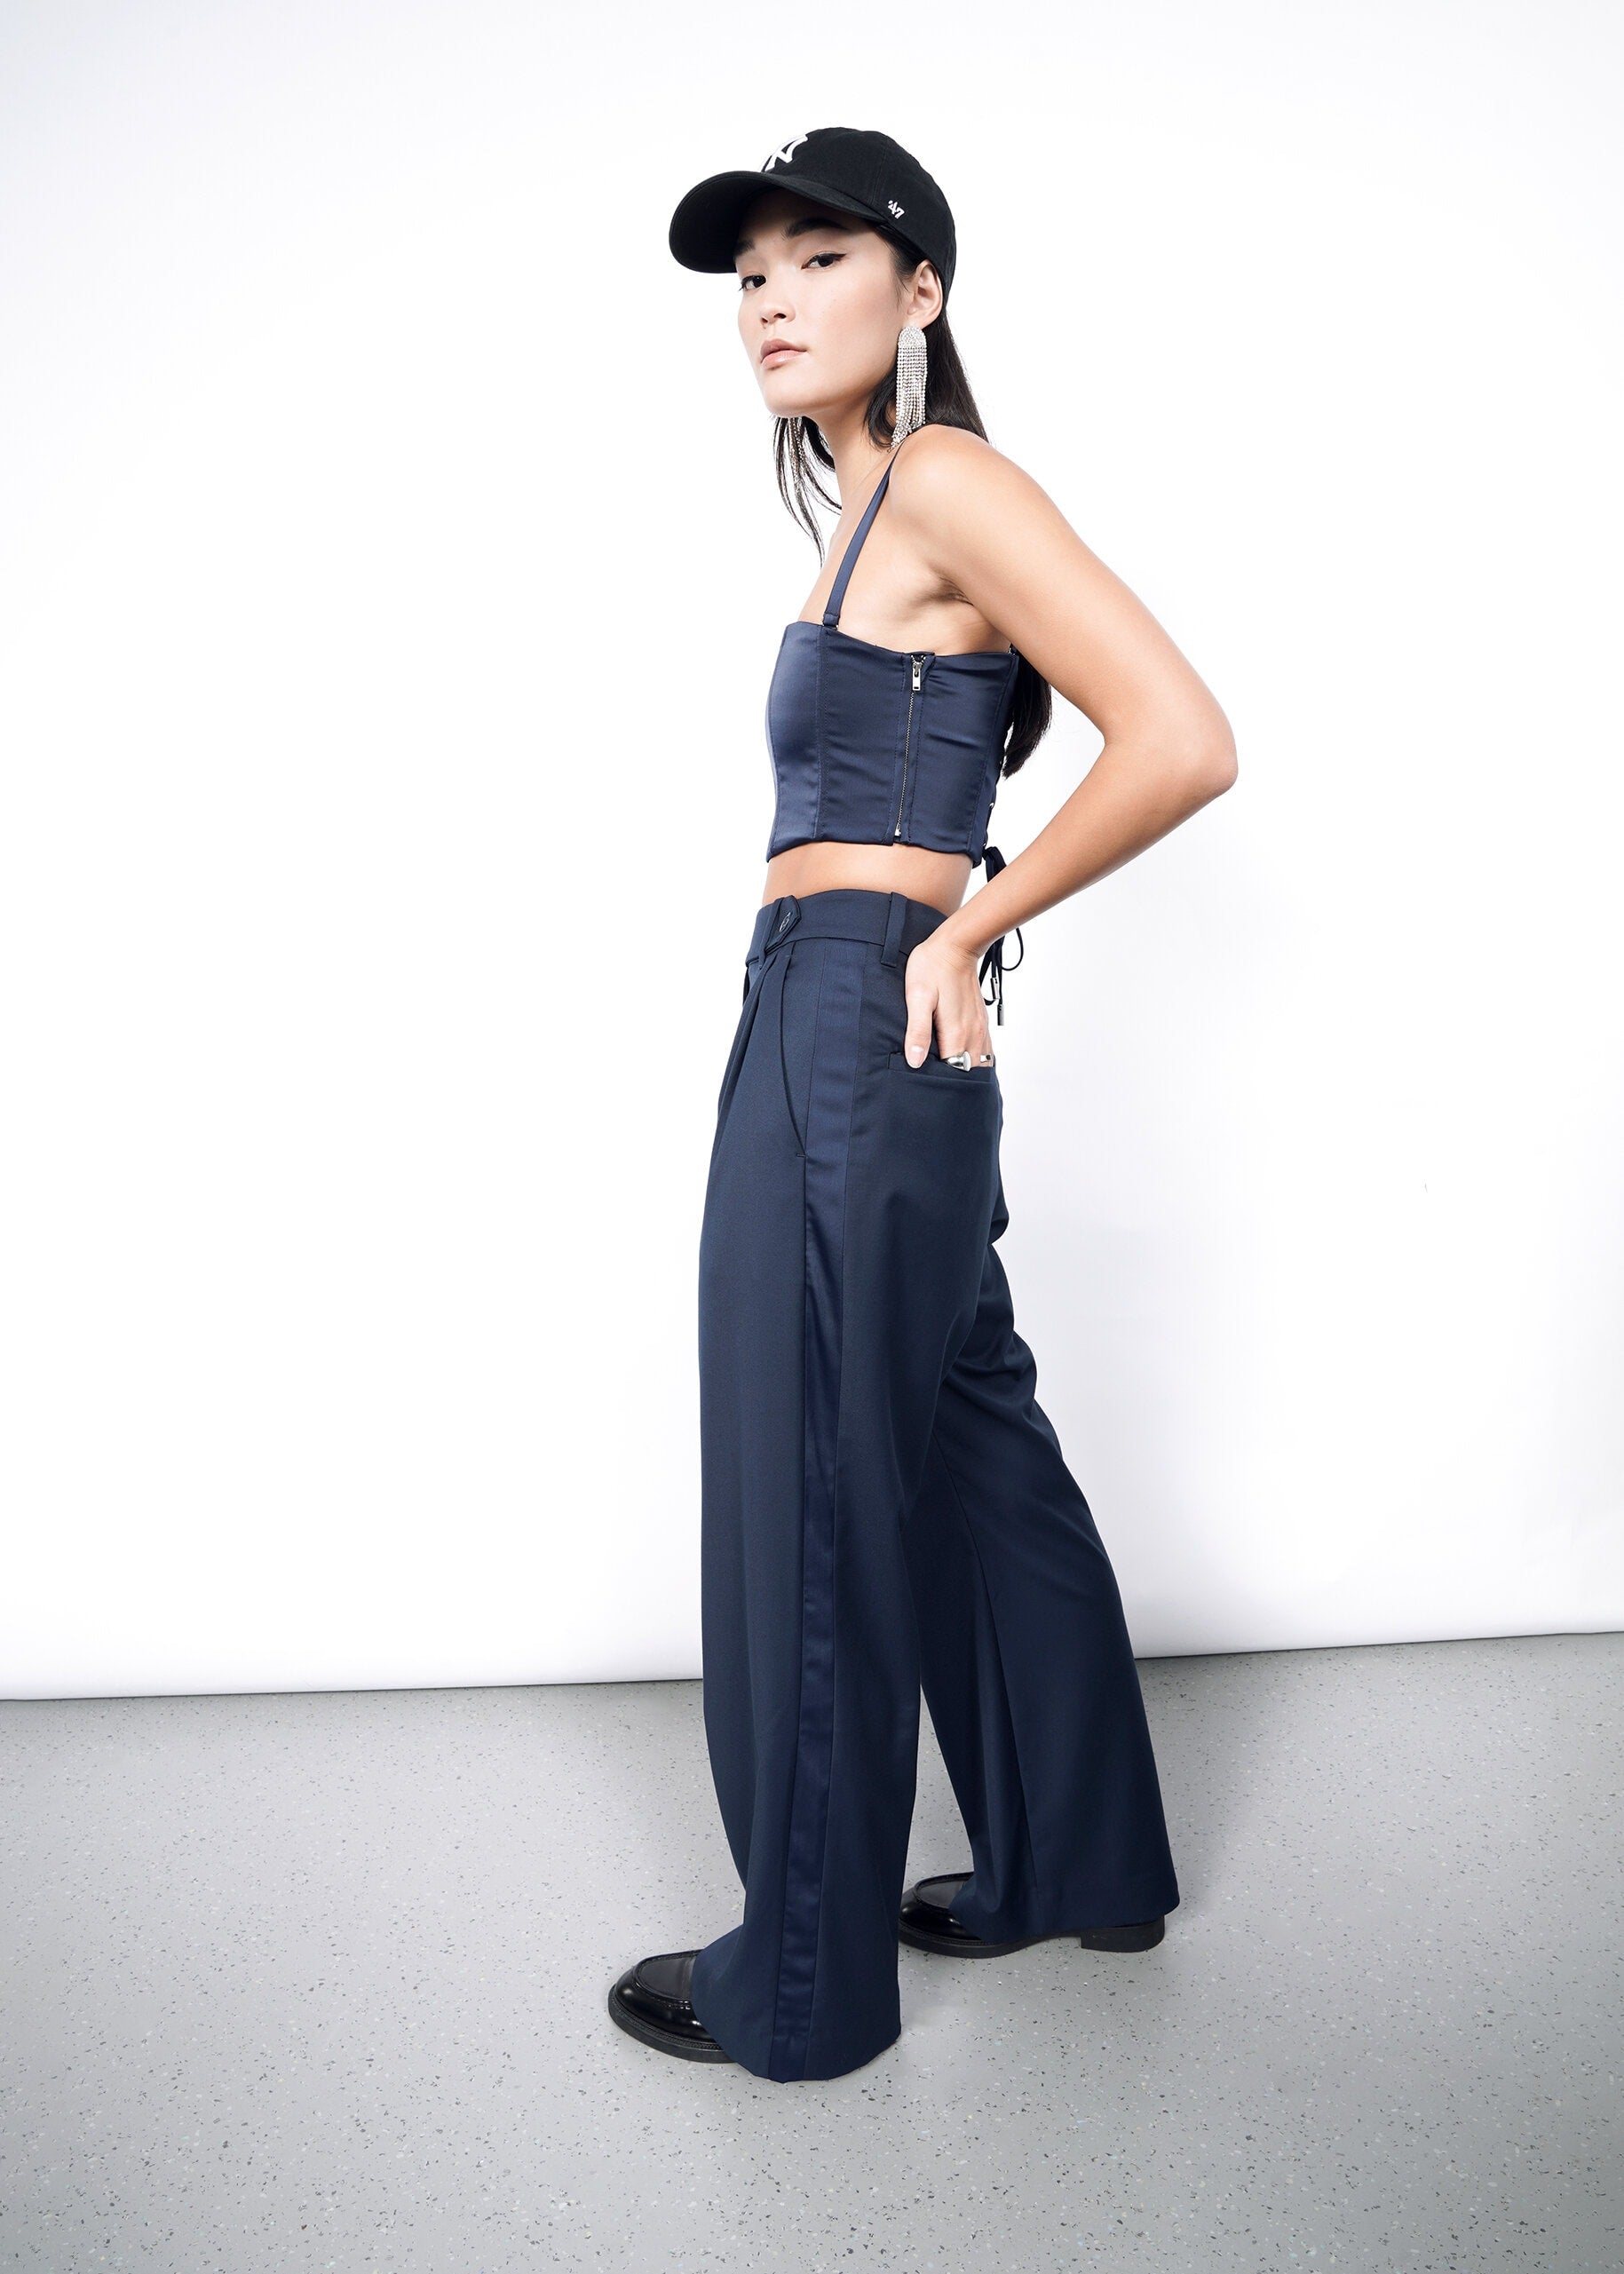 The Empower Colorblock Wide Leg Trouser in Navy